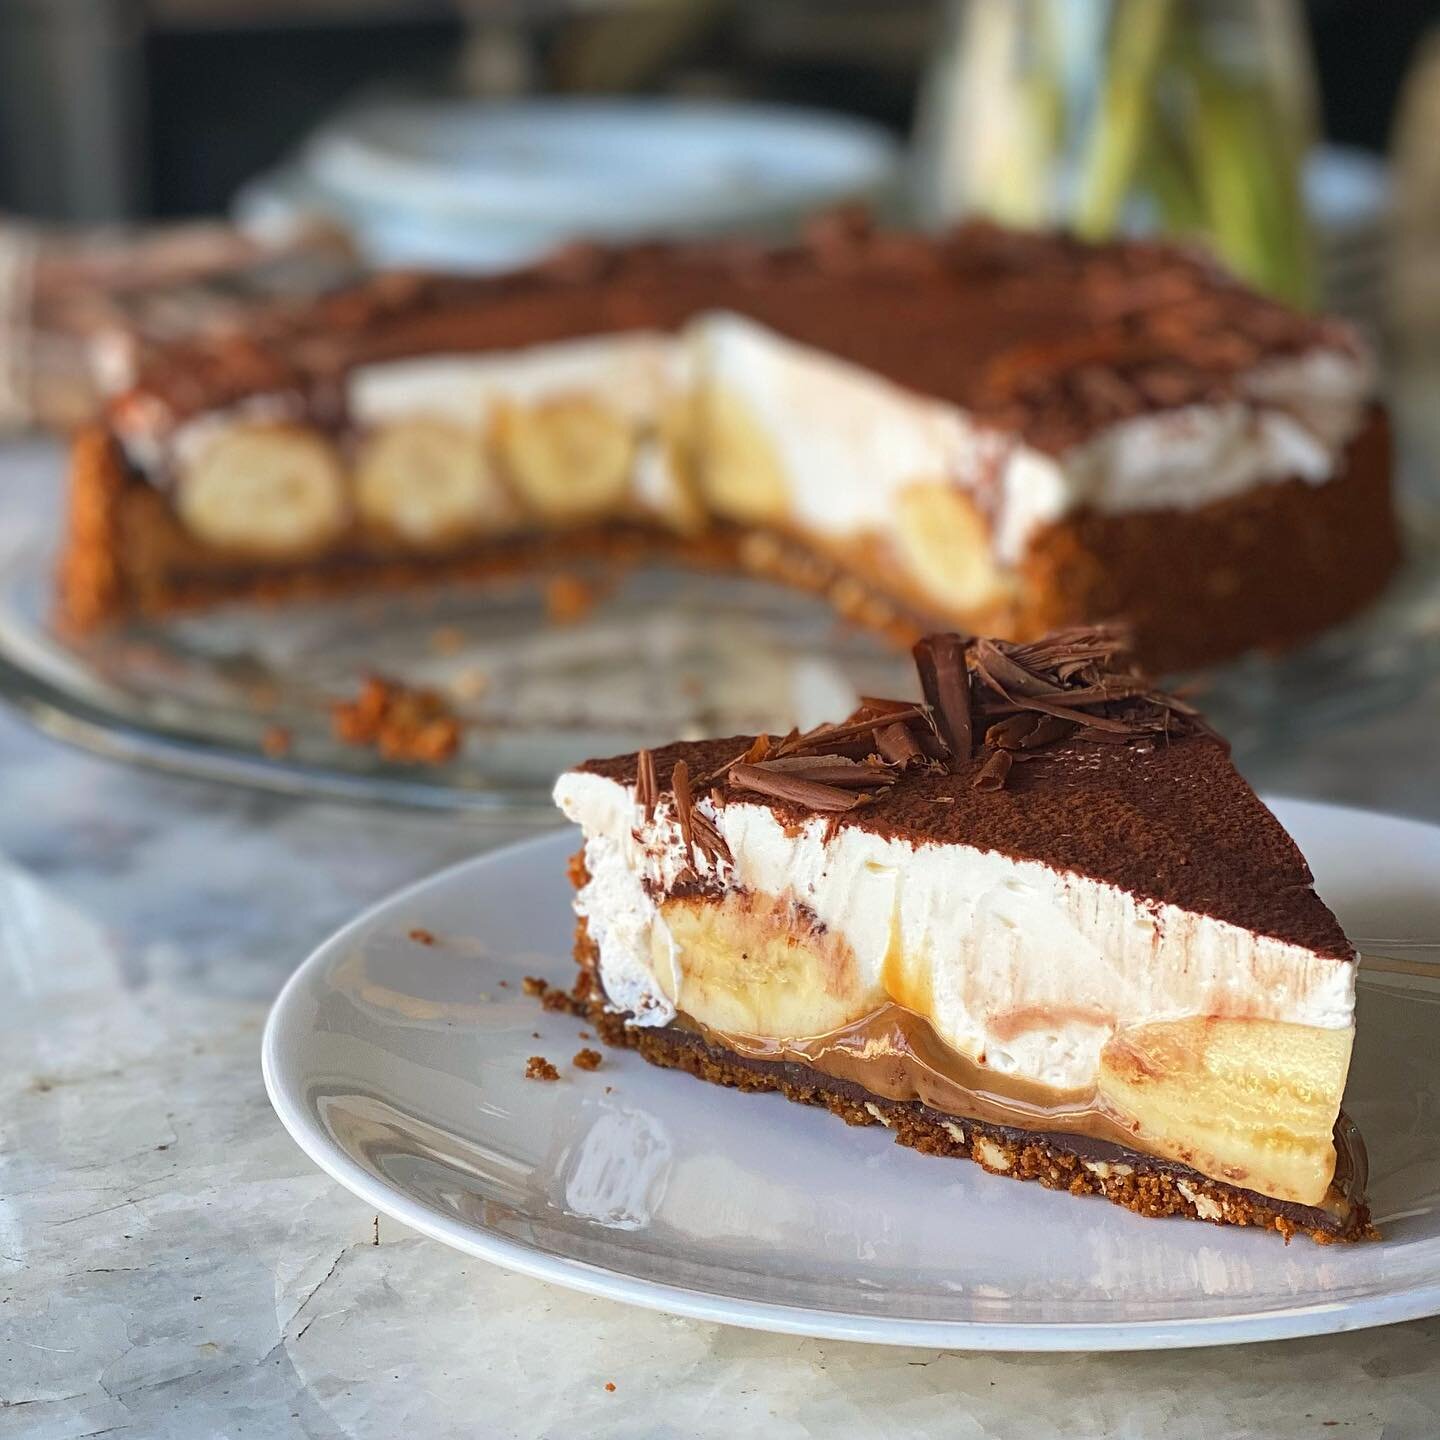 It&rsquo;s Lovers Weekend and we&rsquo;re celebrating with BANOFFEE PIE 🍌💕: homemade graham cracker crust laden with juicy @rincontropics macadamia nuts,  @tchochocolate ganache, dulce de leche, bananas, and cr&egrave;me fra&icirc;che chantilly 🌰?